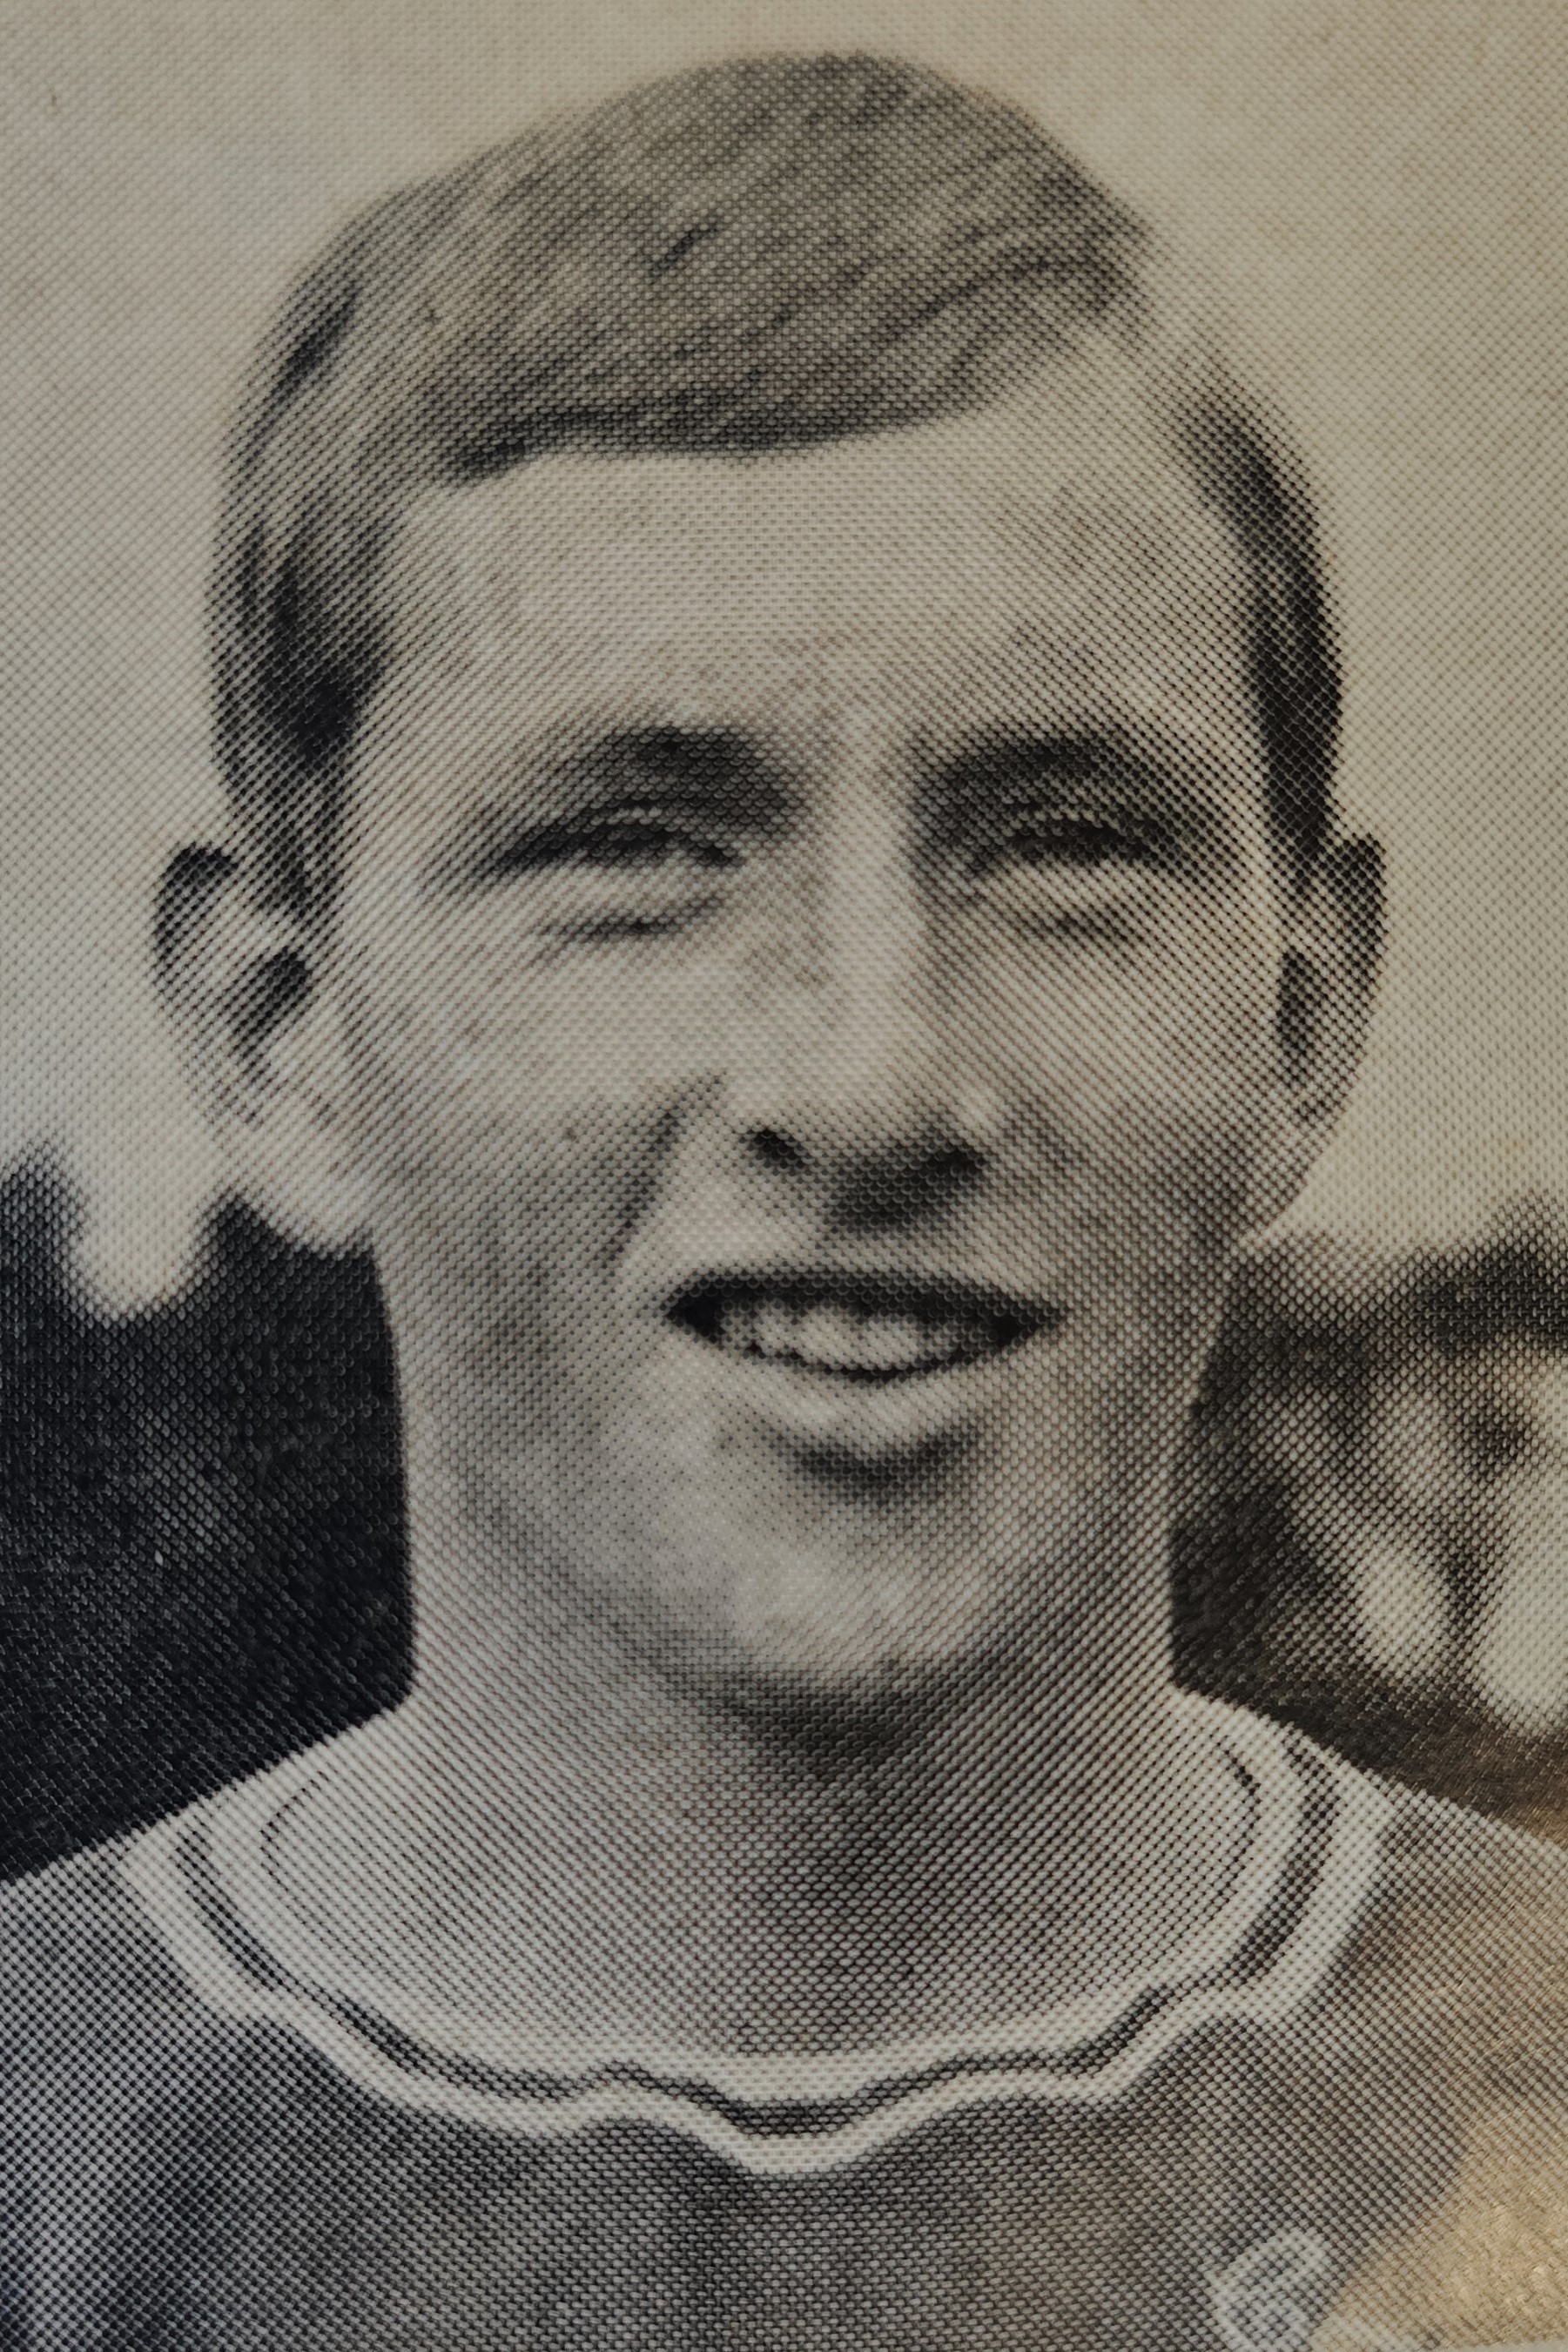 Chelsea FC non-first-team player Frank Conboy